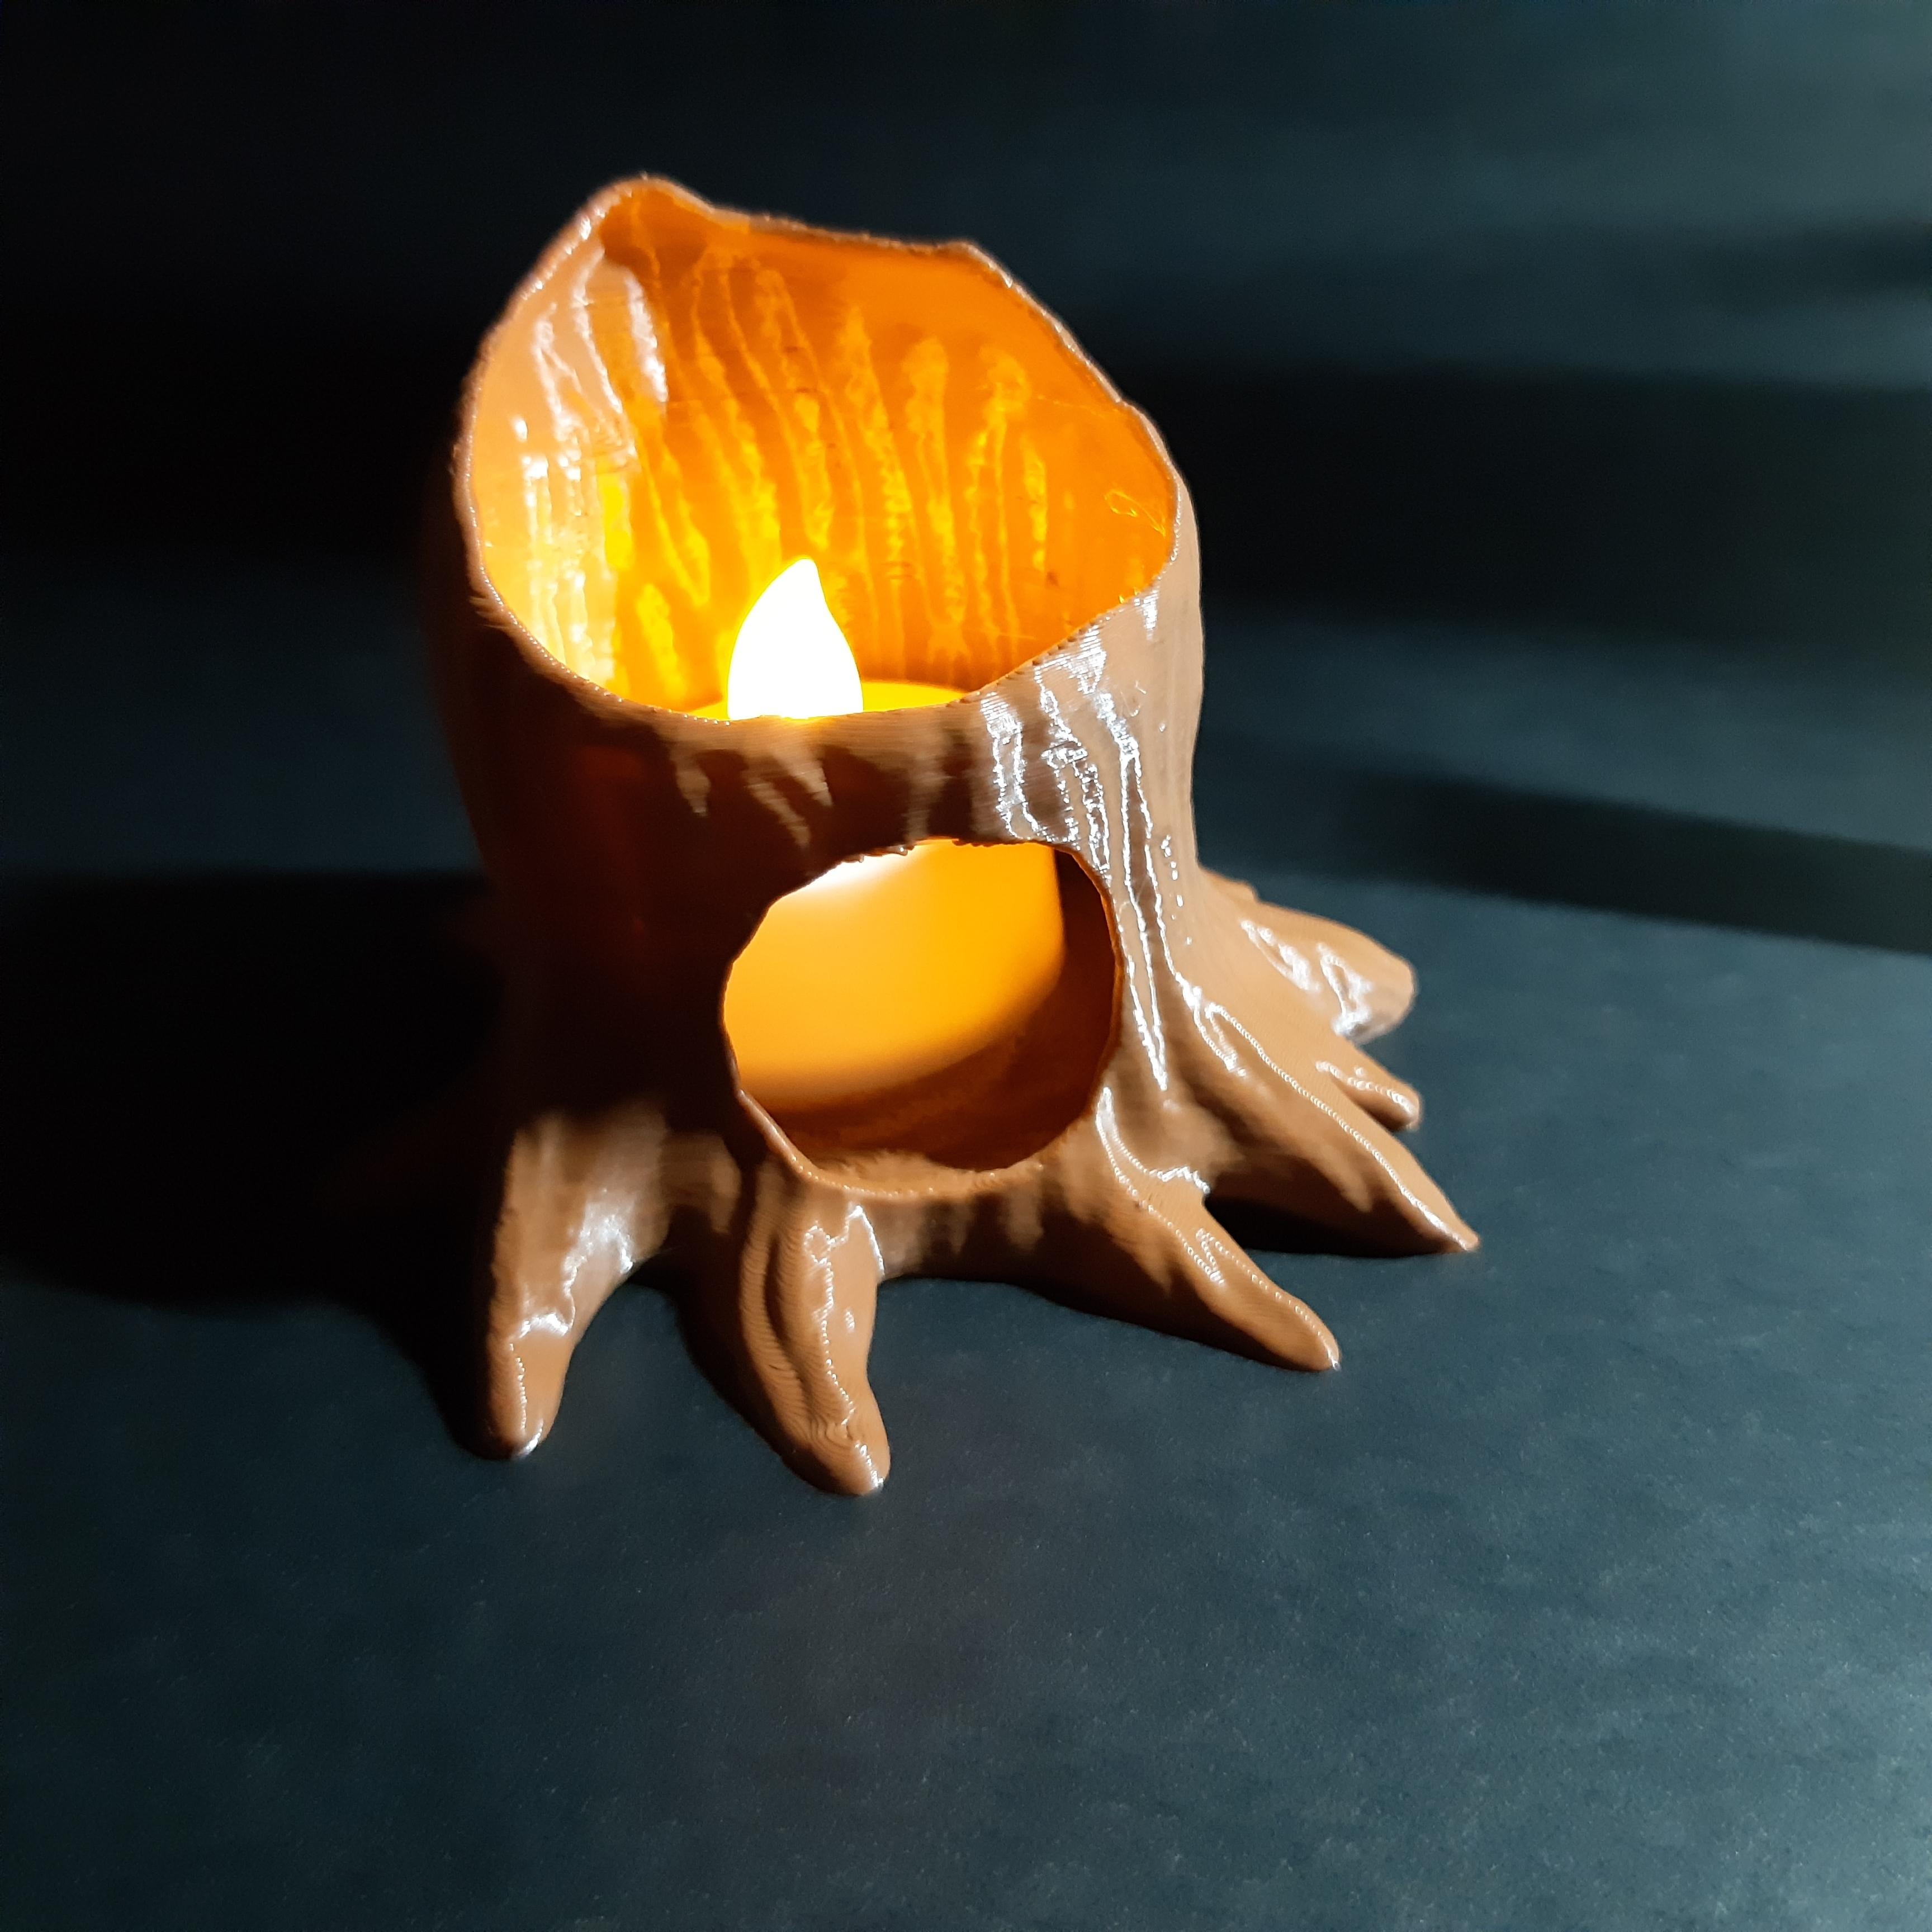 HOLLOW STUMP CONTAINER - PEN HOLDER - TEALIGHT HOLDER - PRINT-IN-PLACE - SUPPORT FREE 3d model